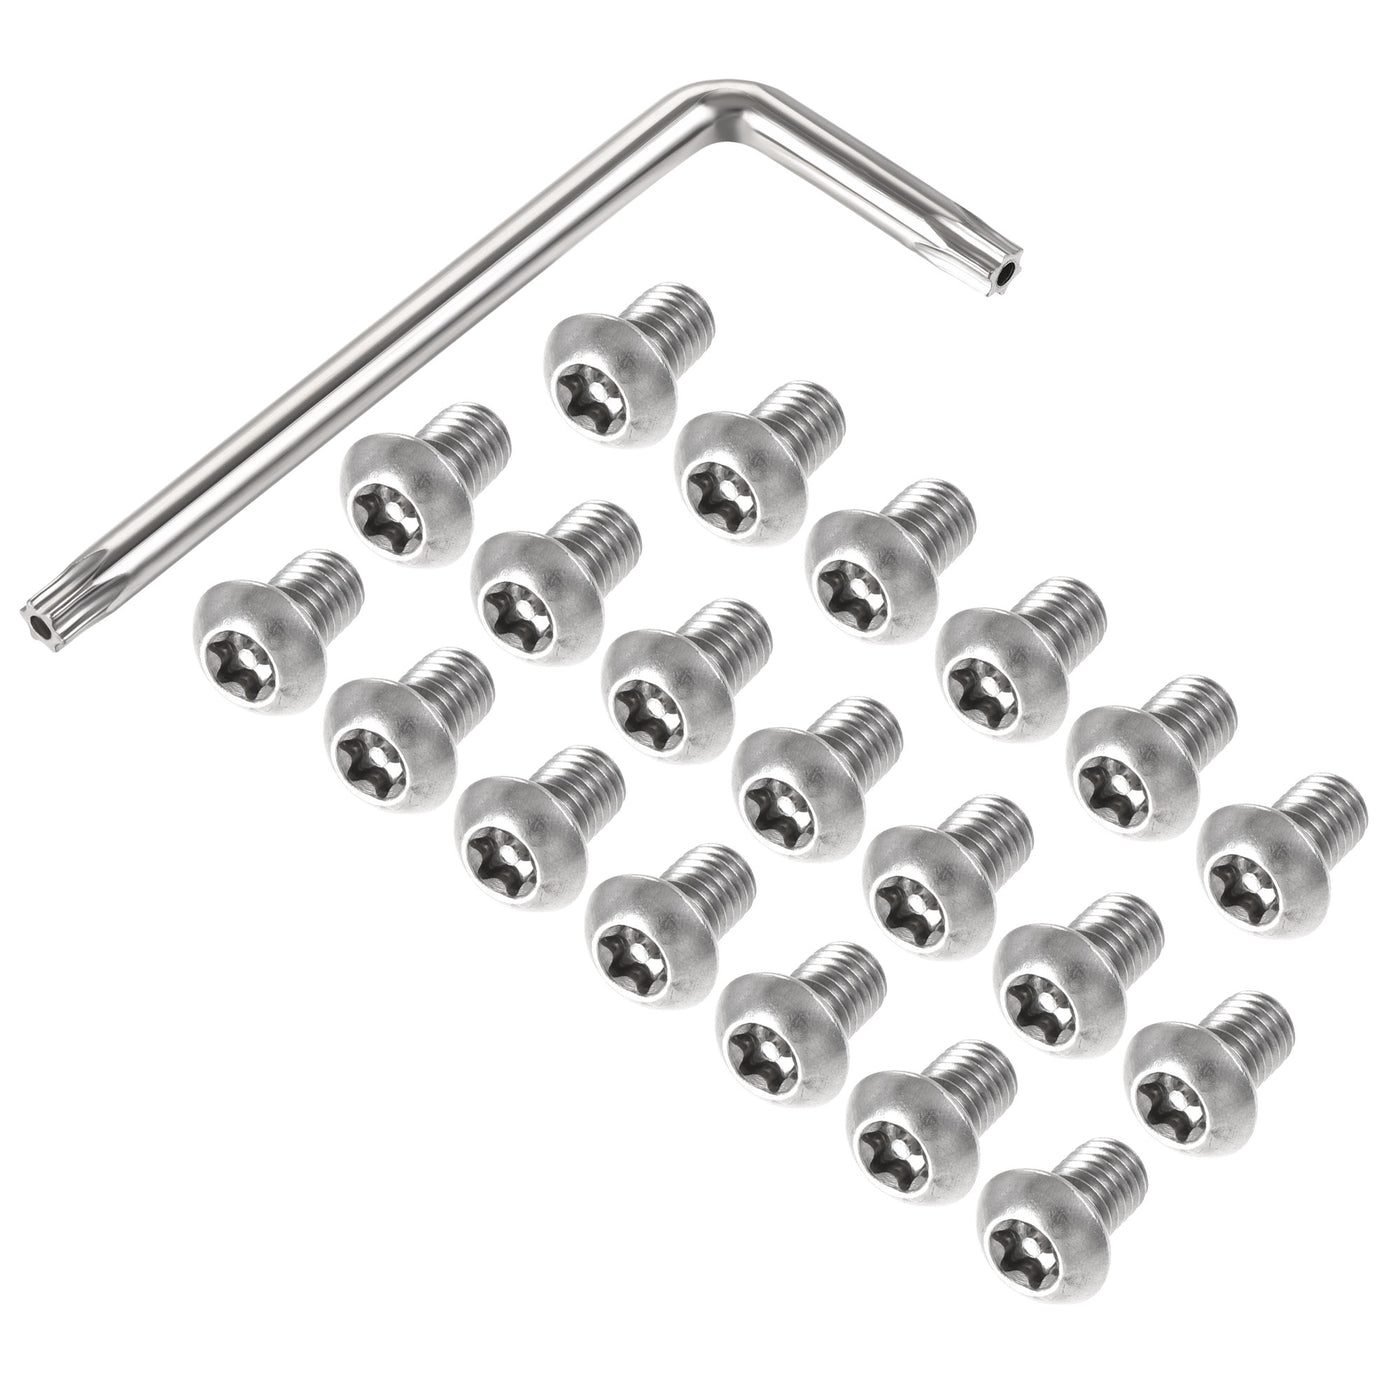 uxcell Uxcell M8x12mm Torx Security Machine Screw, 20pcs Pan Head Screws Inside Column, with T40 L-Type Wrench, 304 Stainless Steel Fasteners Bolts